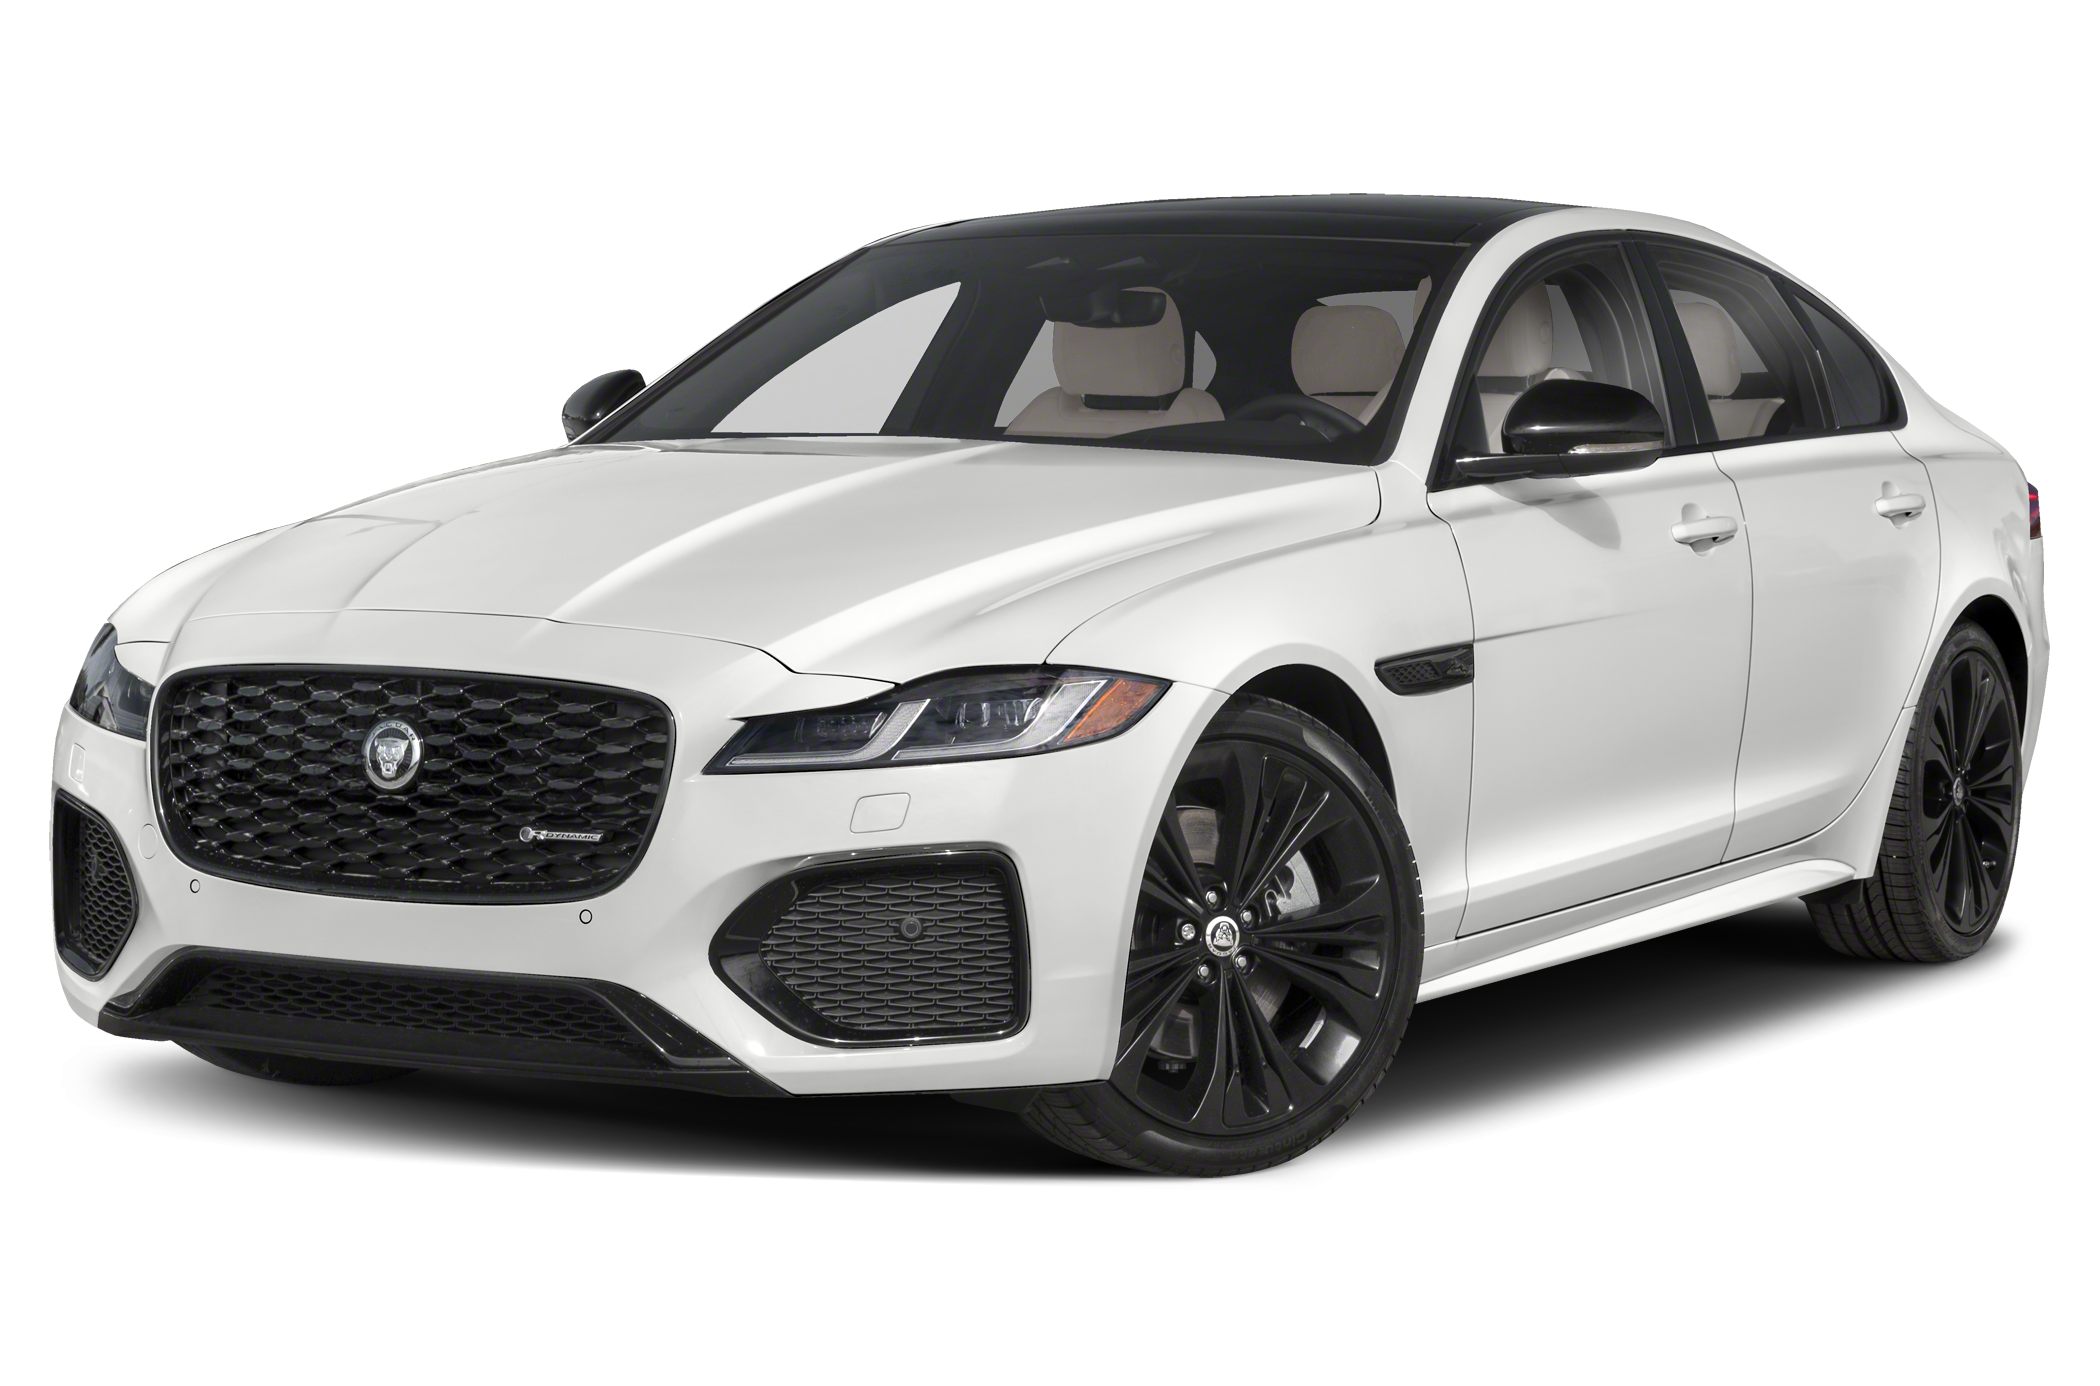 2021 Jaguar XF Mid-Cycle Refresh Revealed With Major Interior Updates